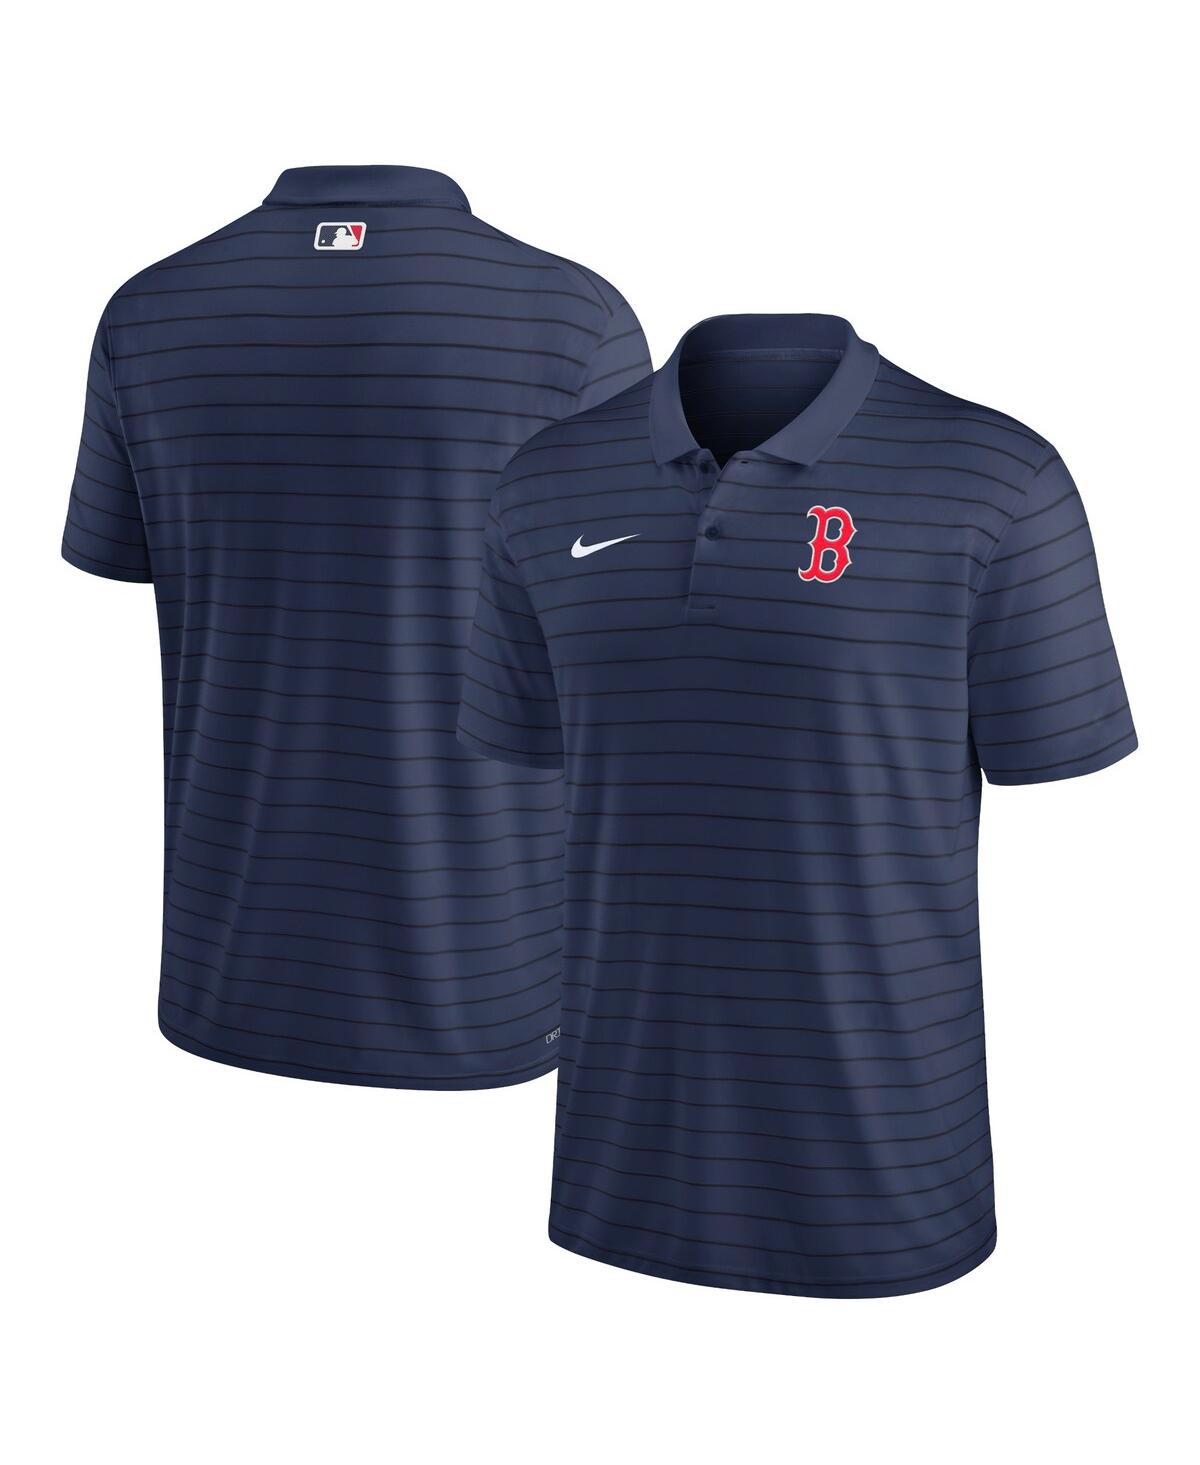 Men's Nike Navy Boston Red Sox Authentic Collection Victory Striped Performance Polo Shirt - Navy